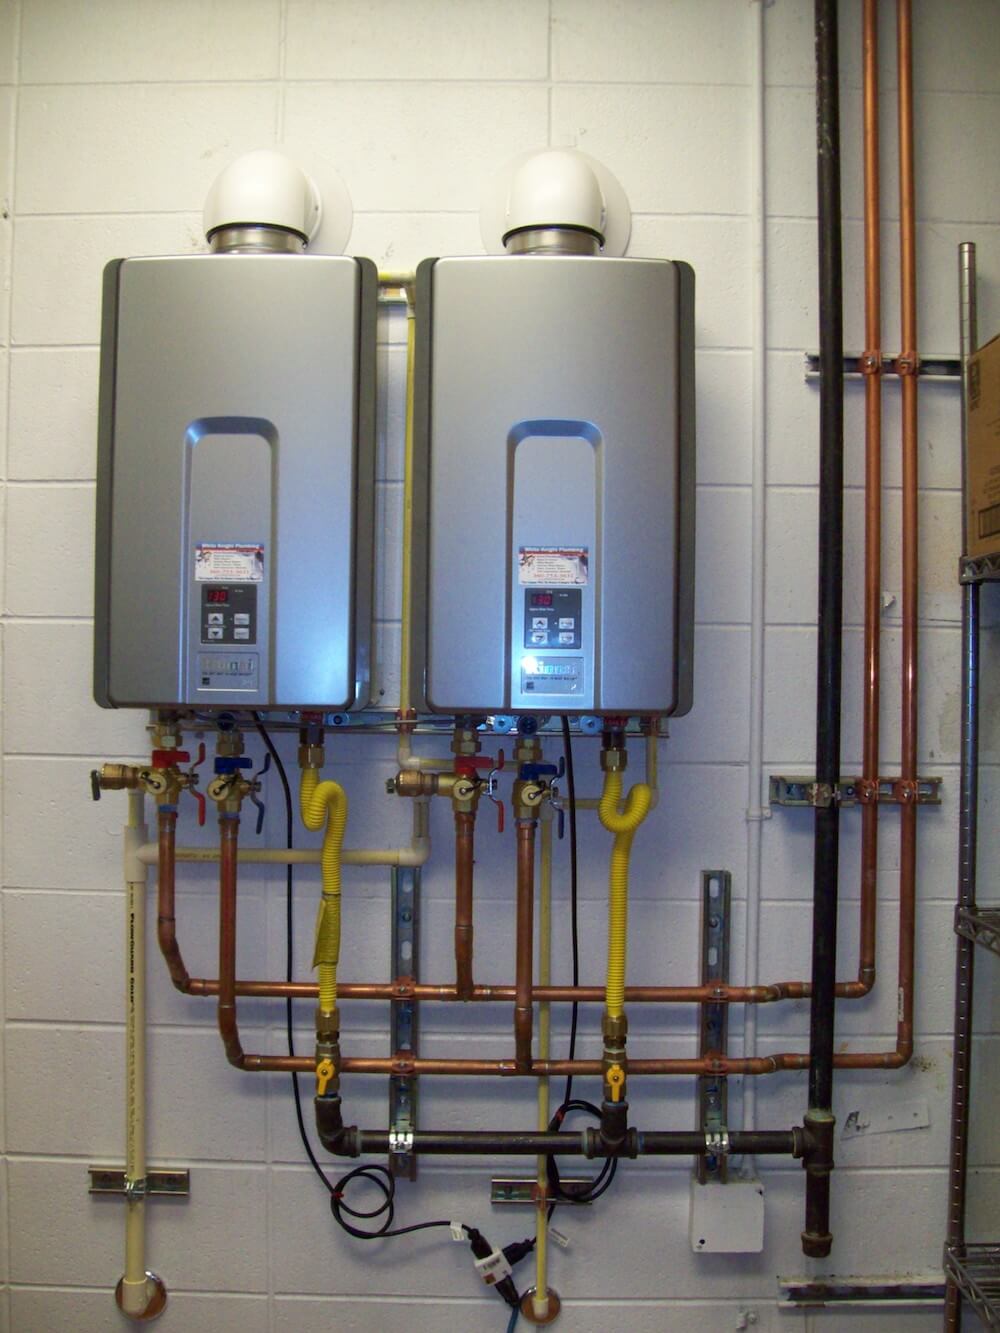 2020 Water Heater Repair Cost Average Cost To Repair A Water Heater